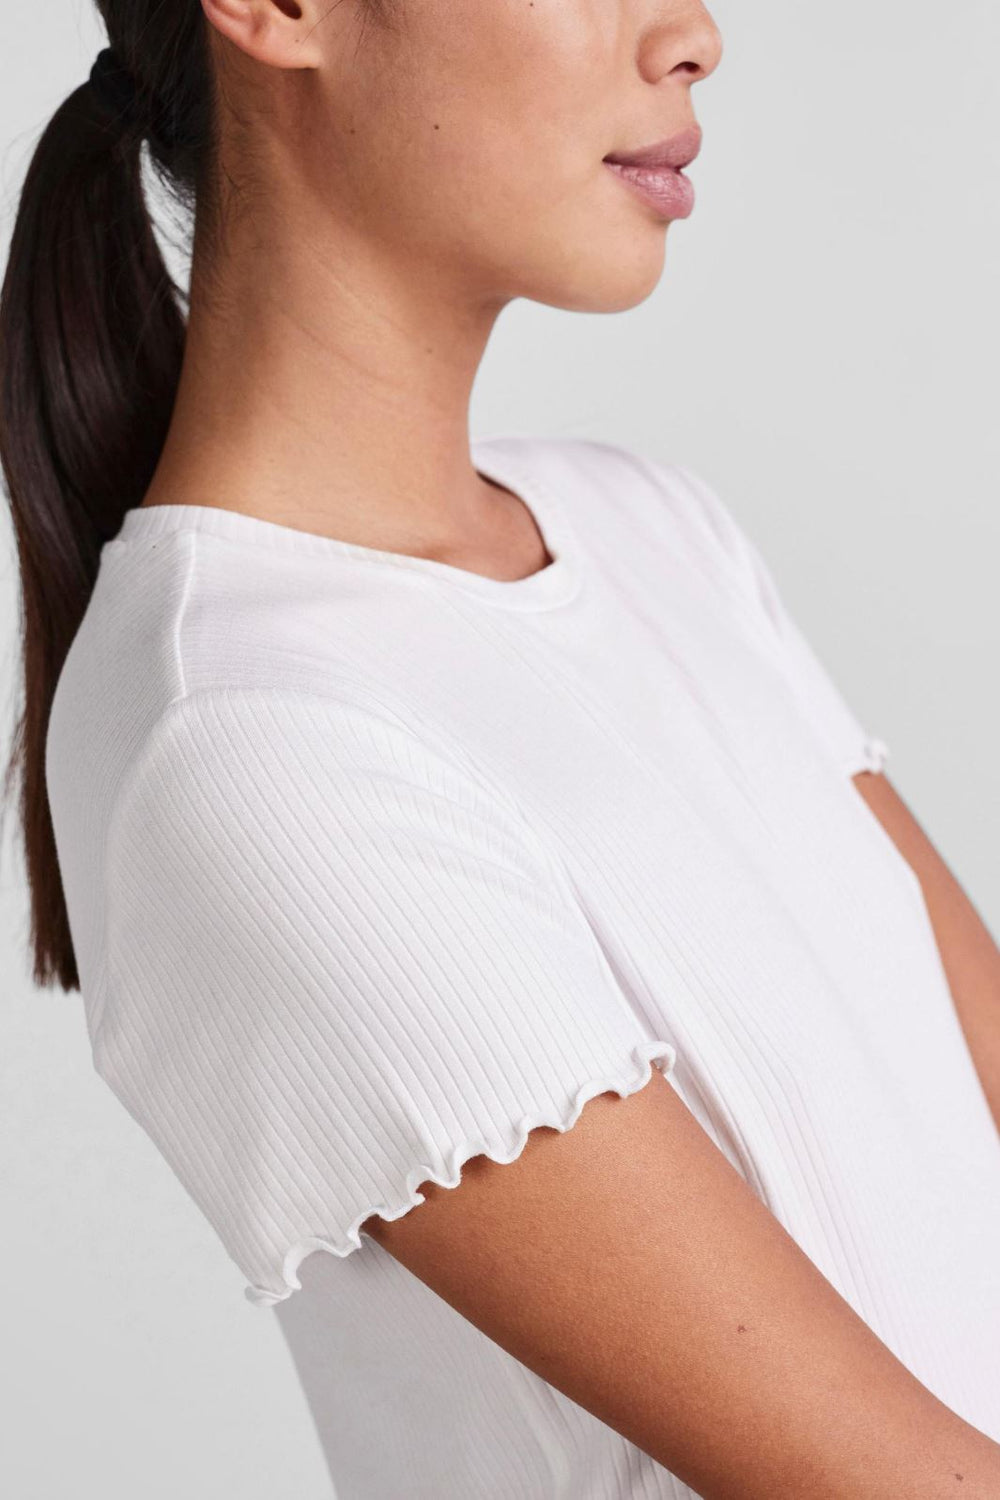 Pieces - Pcnicca Ss O-Neck Top - Bright White T-shirts 